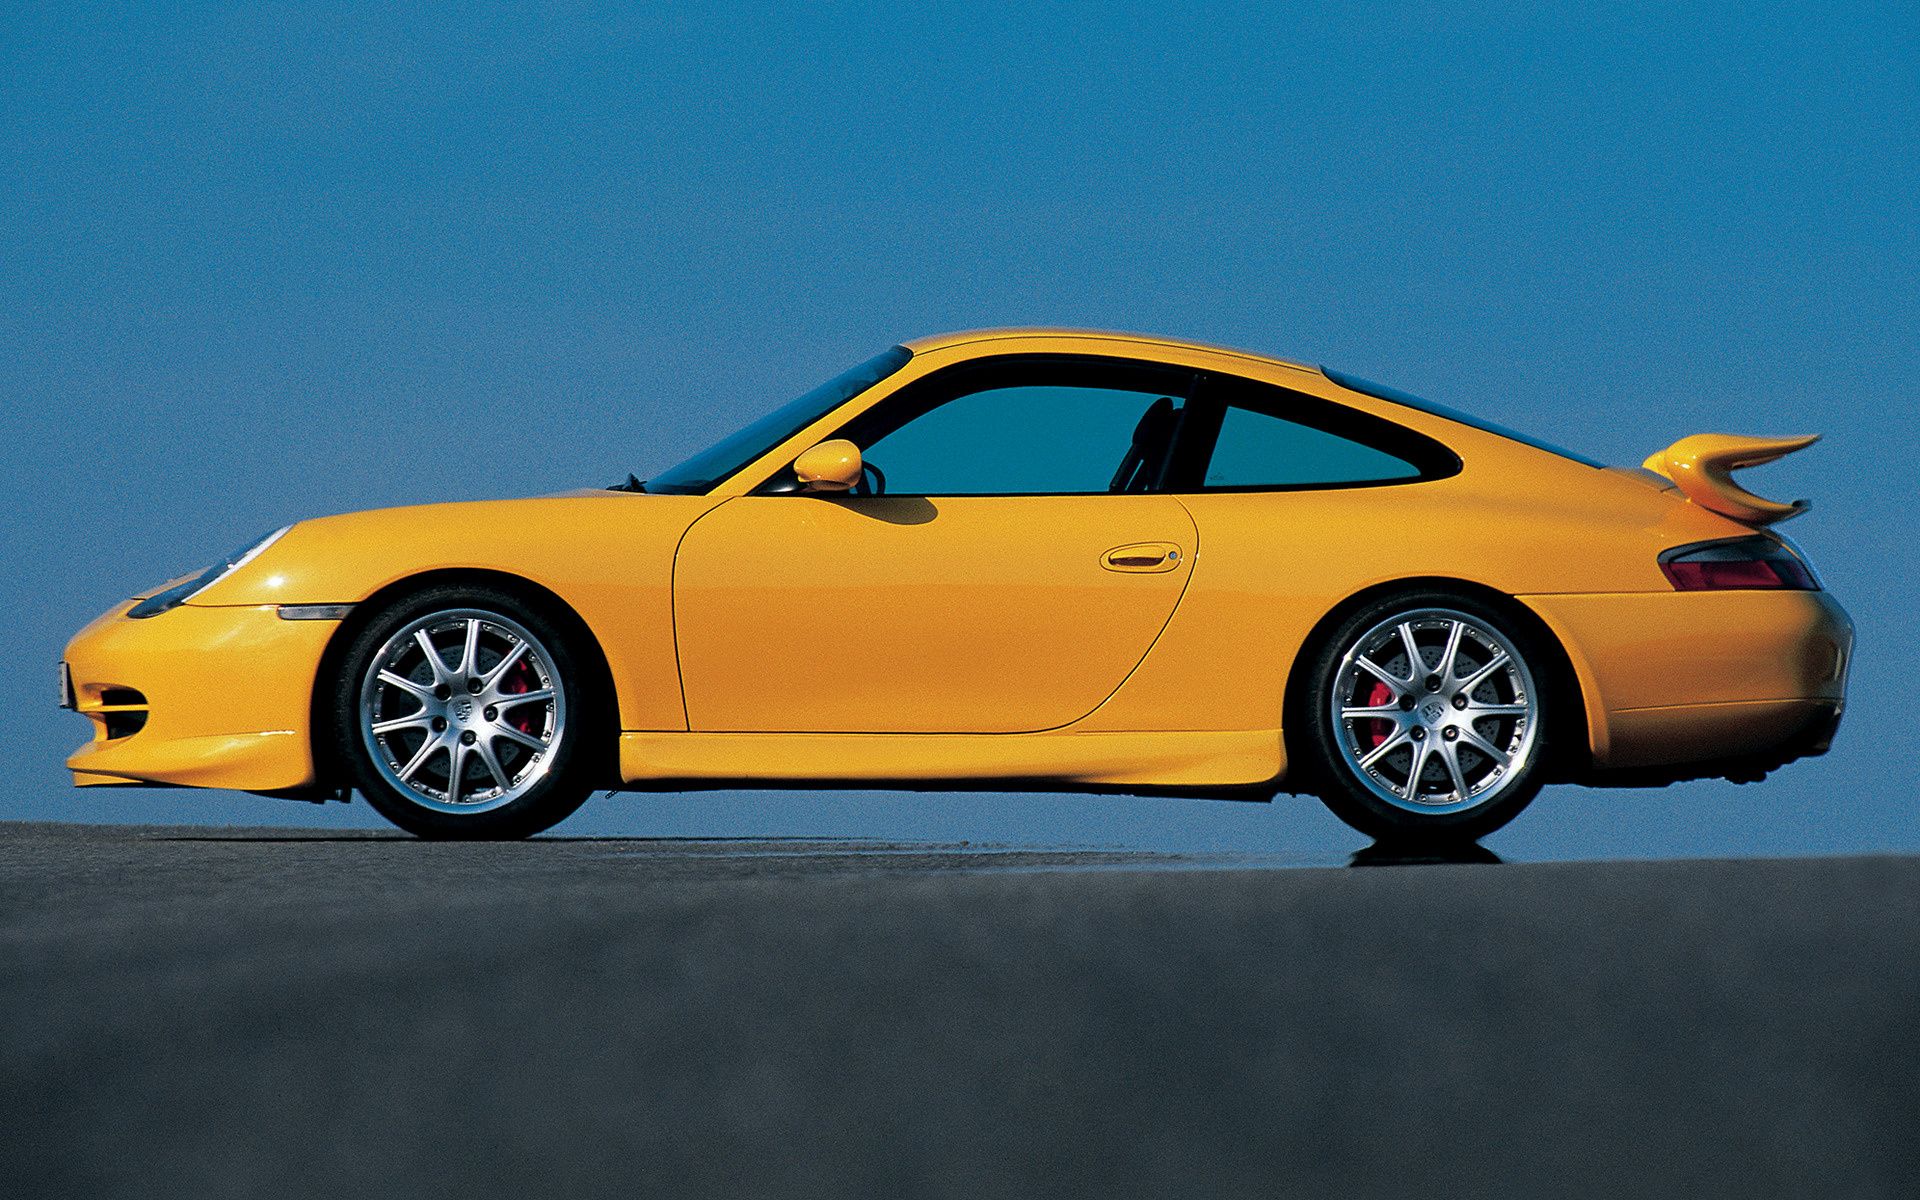 The side view of the first Porsche 911 GT3.